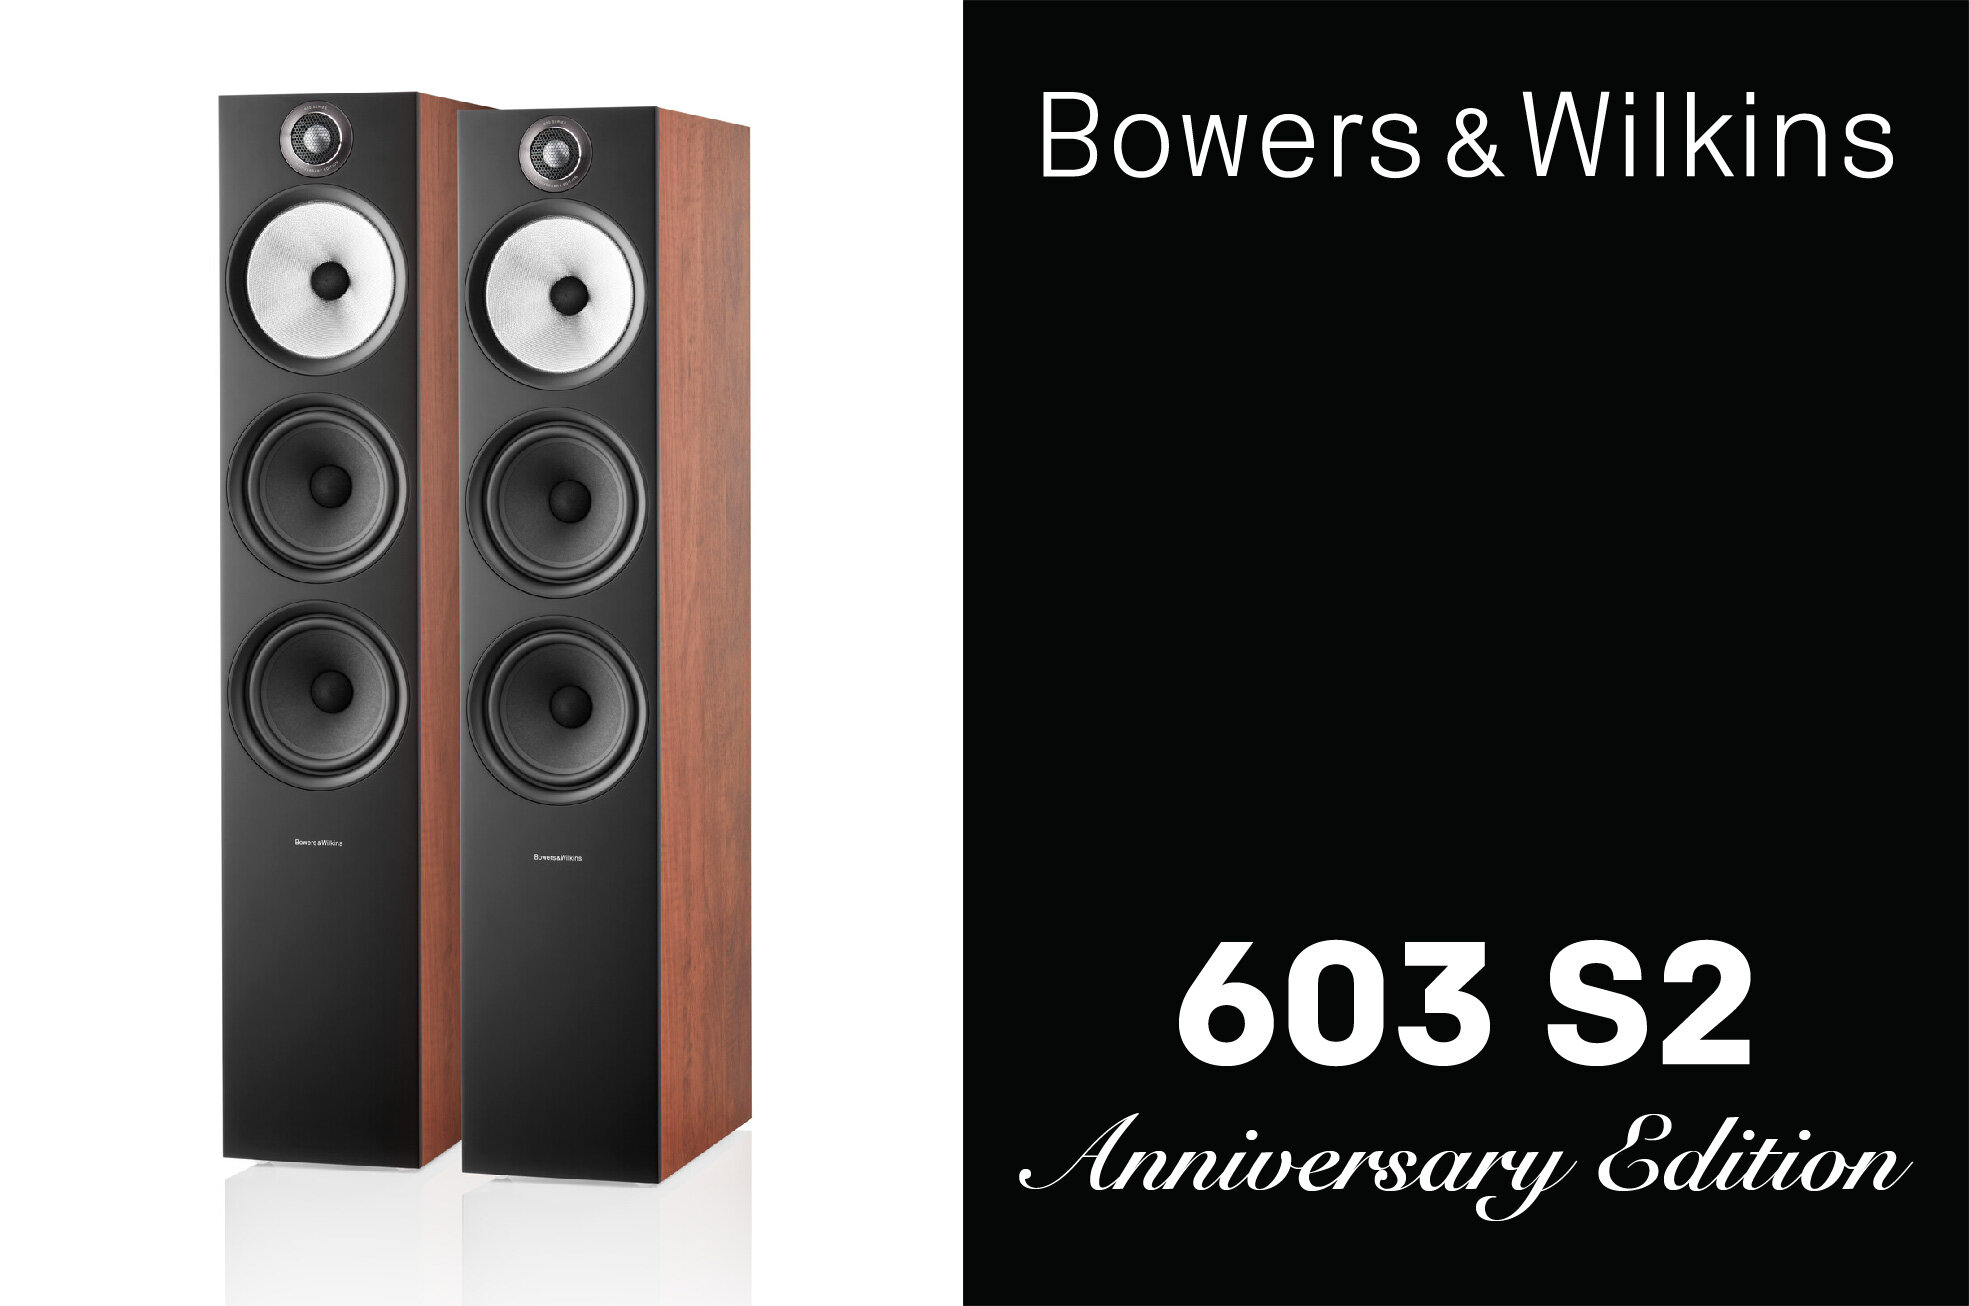 Bowers Wilkins 603 "Anniversary Edition"